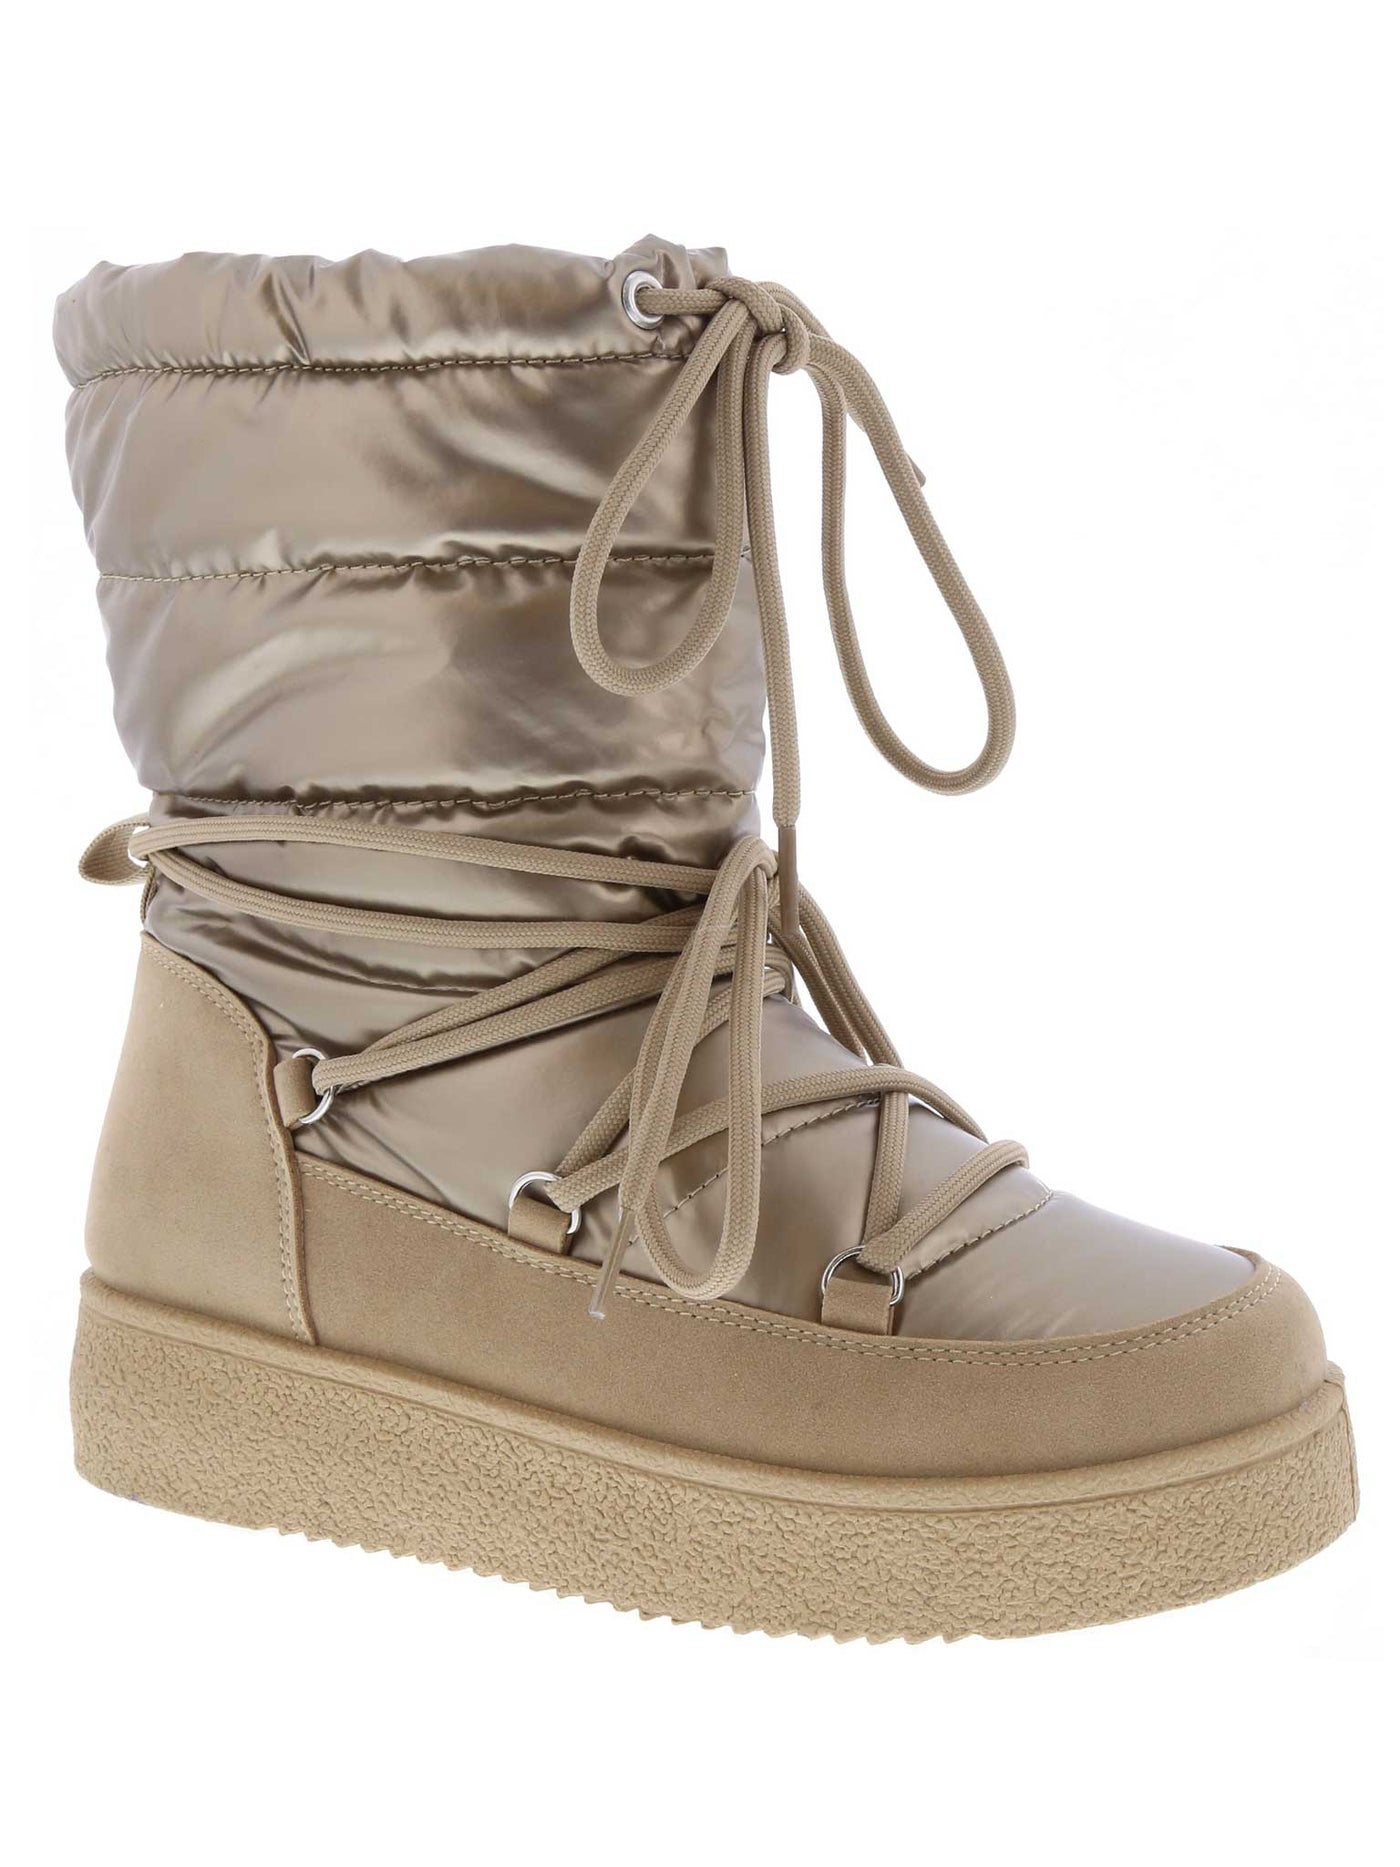 Nylon Lace Up Winter Boots